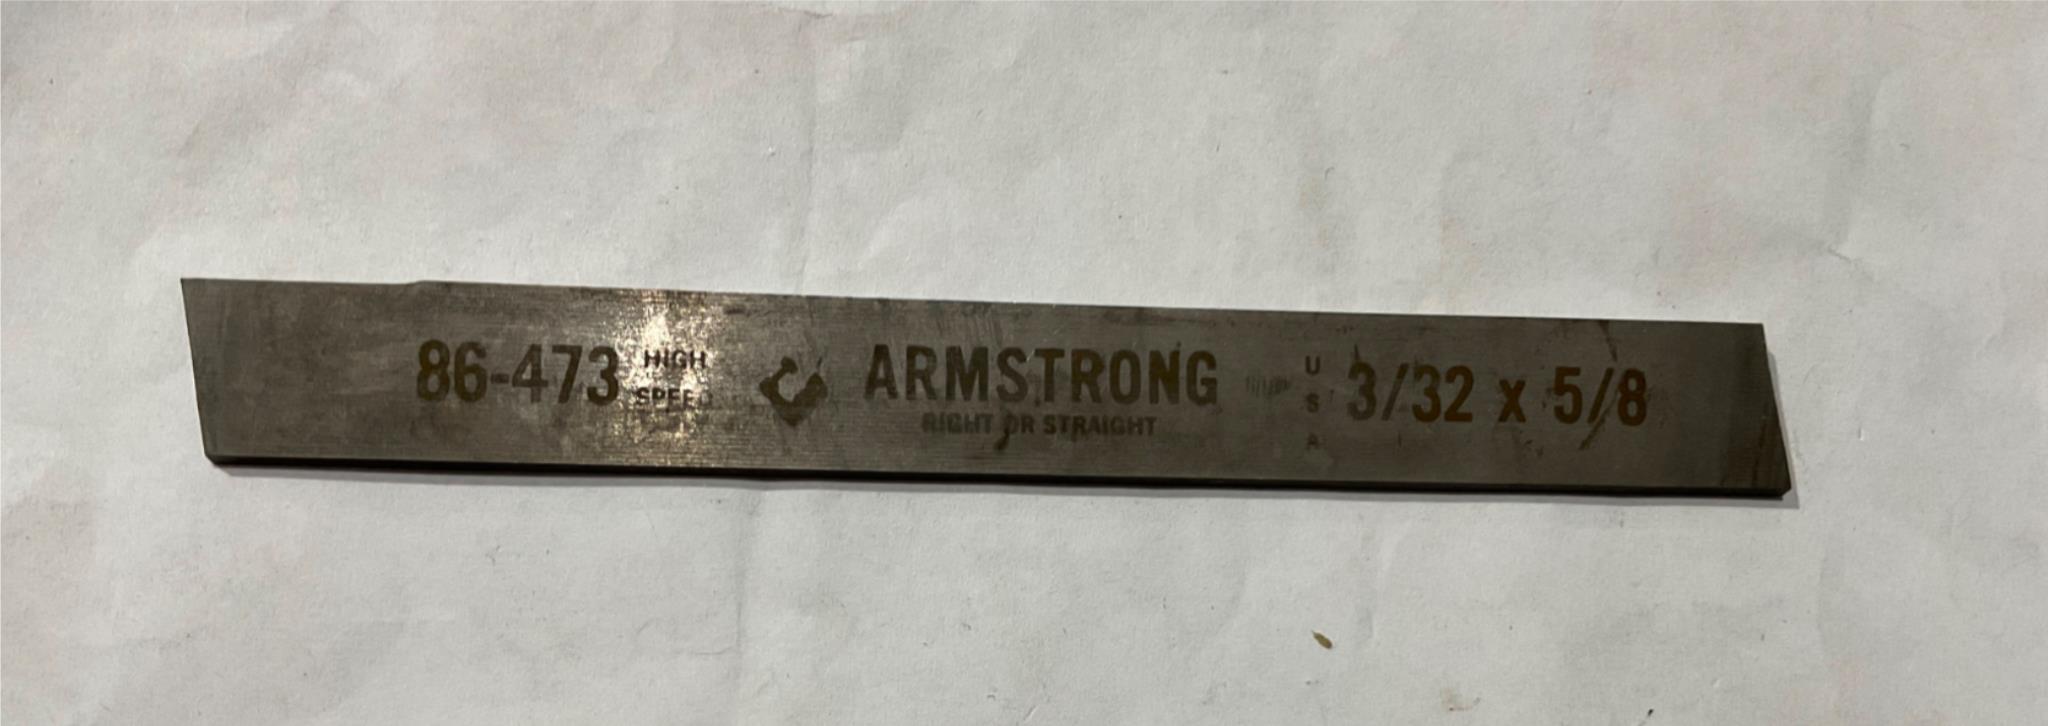 Armstrong 86-473 H.S.S. Cut Off Blade M-2, 3/32 X 5/8 USA #69